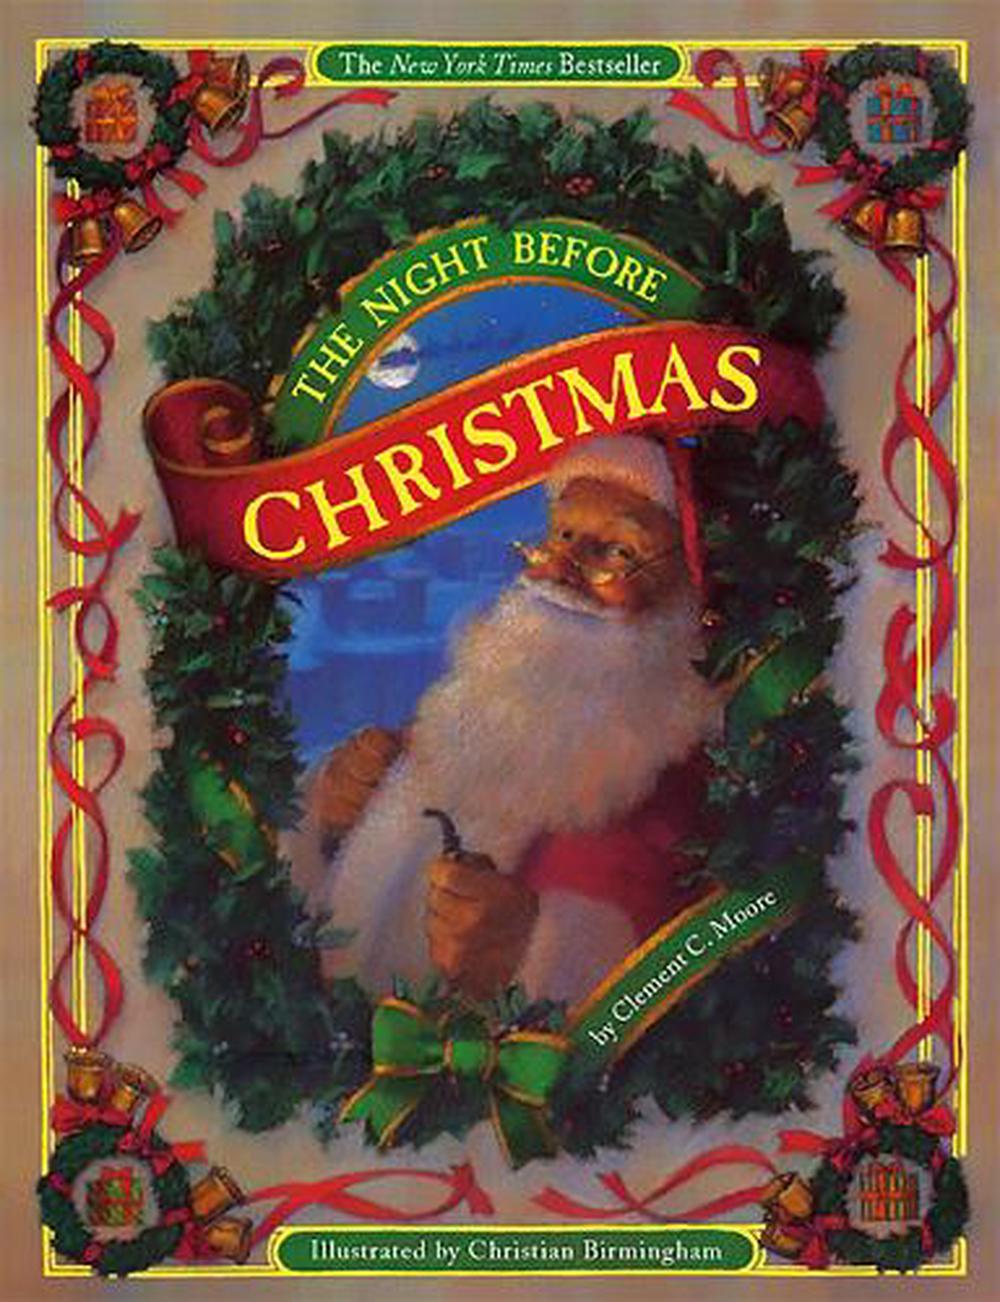 the night before christmas by clement clarke moore book